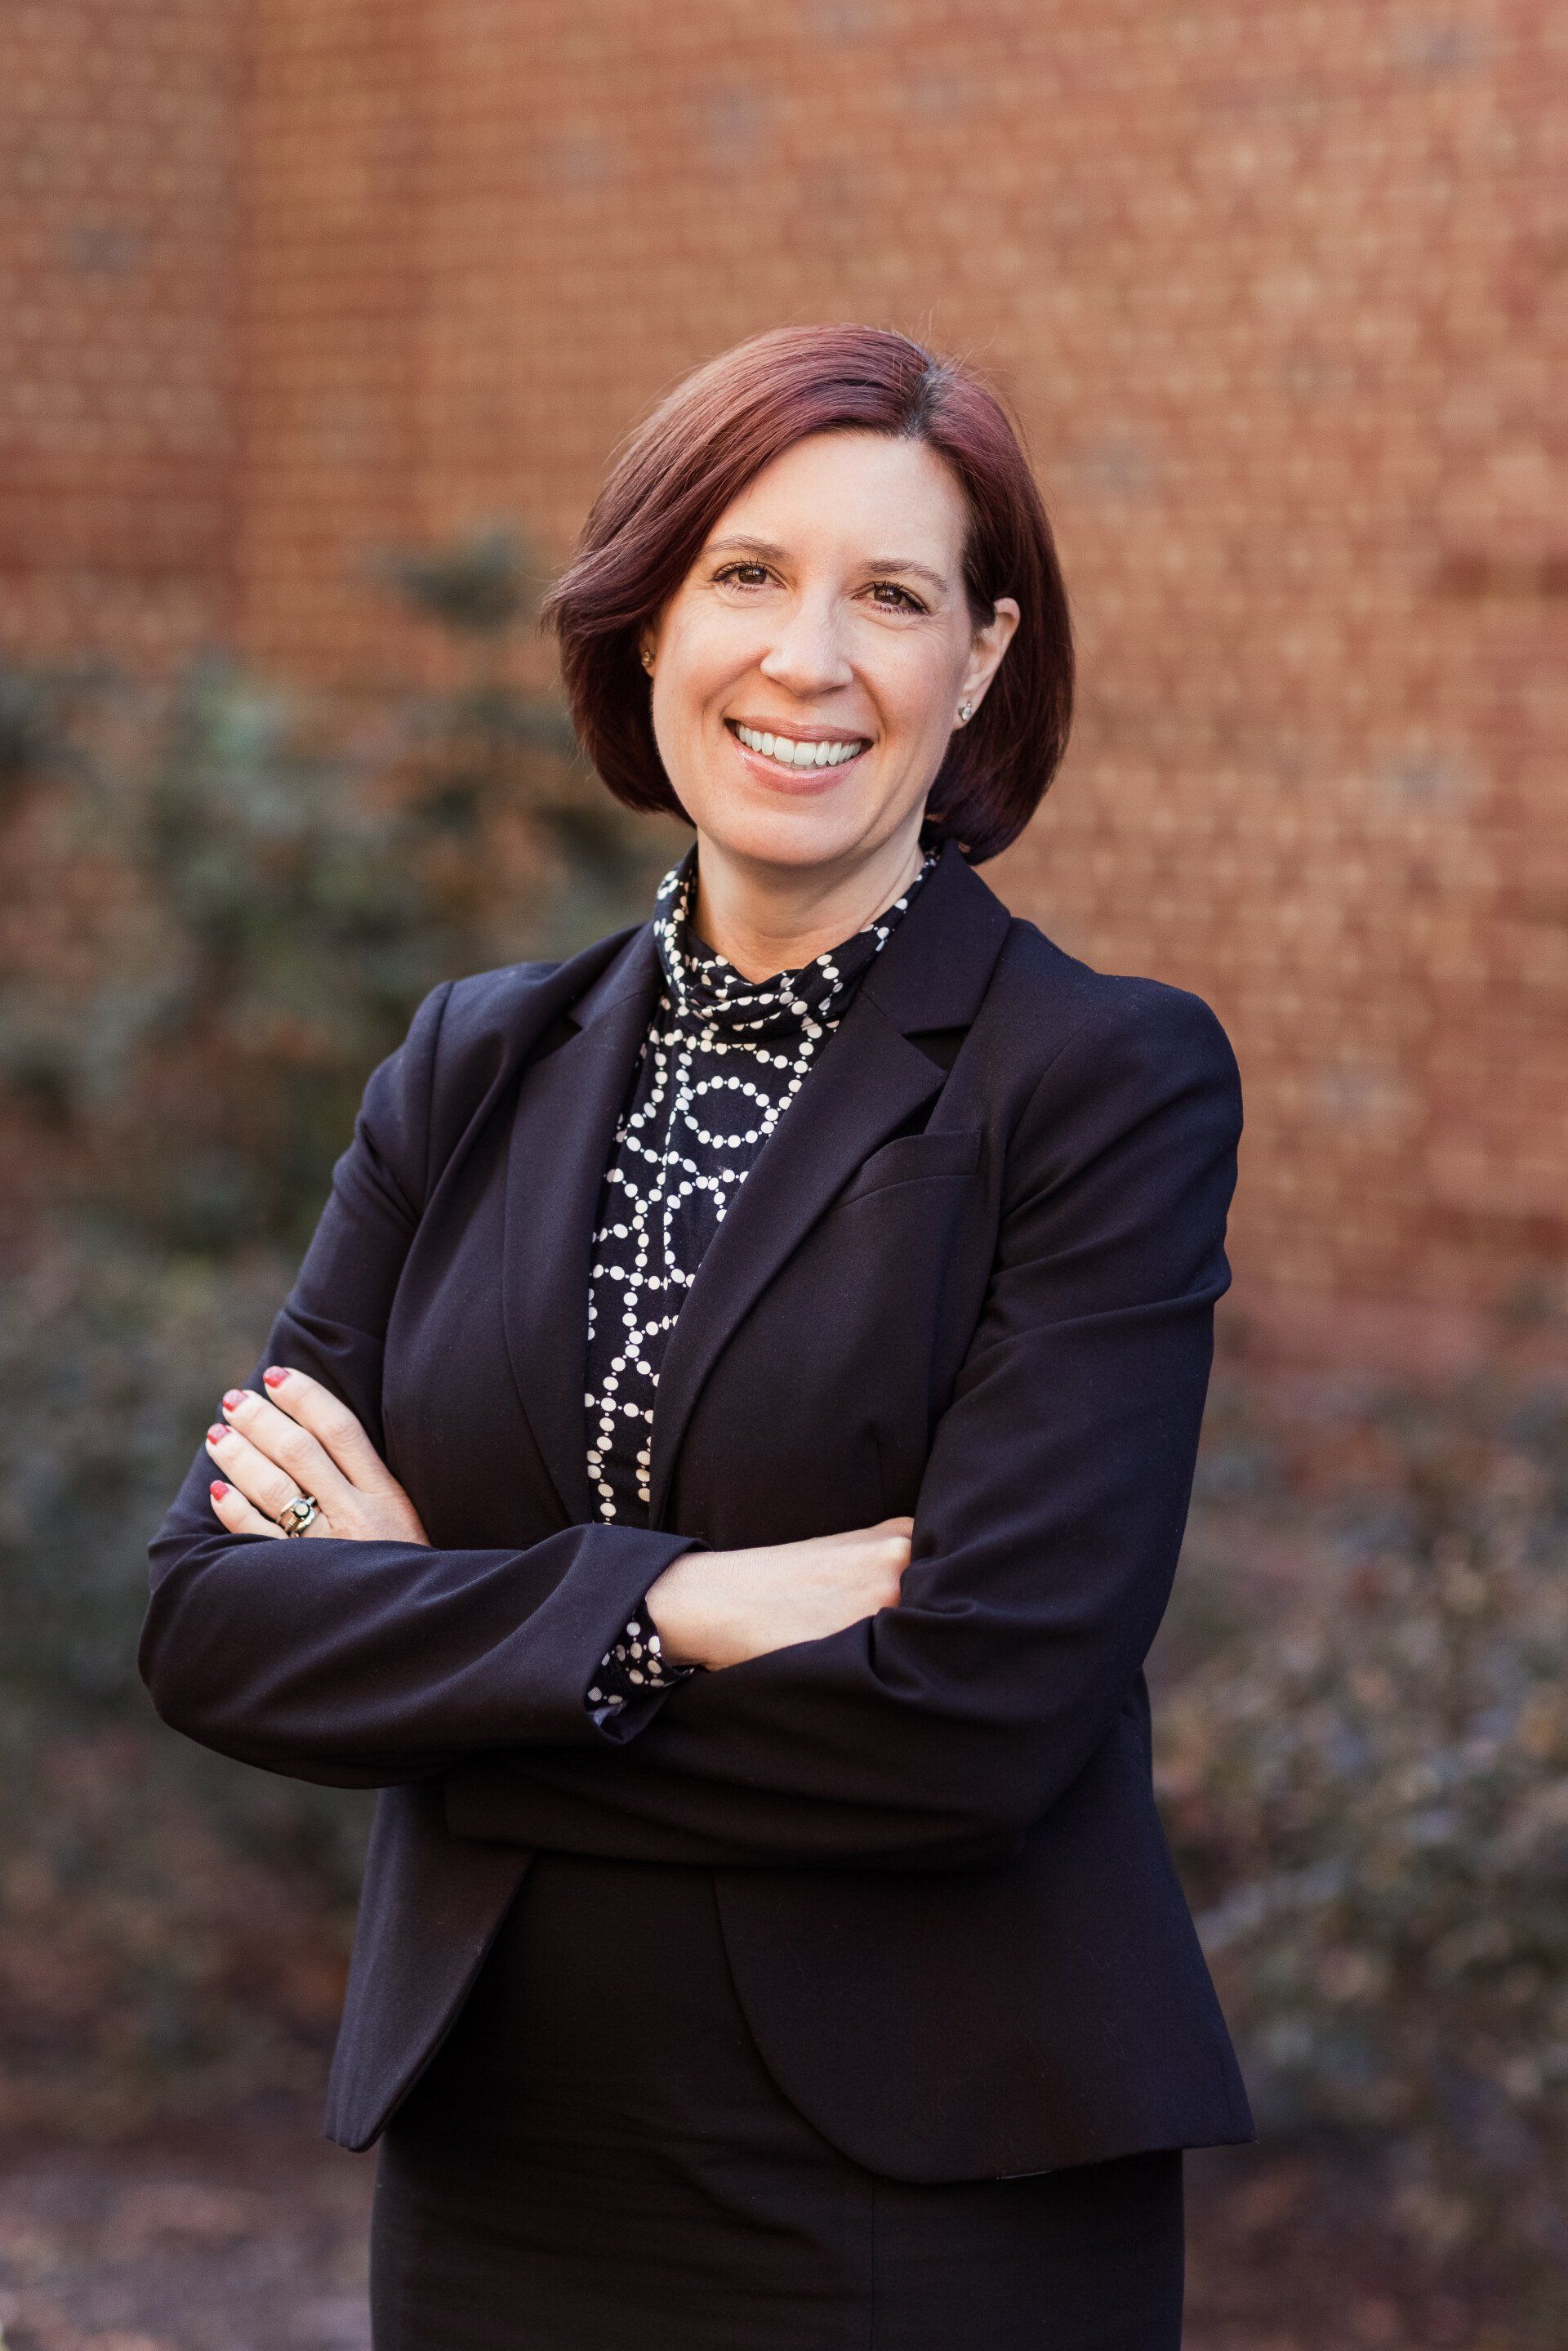 Hire of New Attorney Brings Expansion to Title IX and Civil Practice